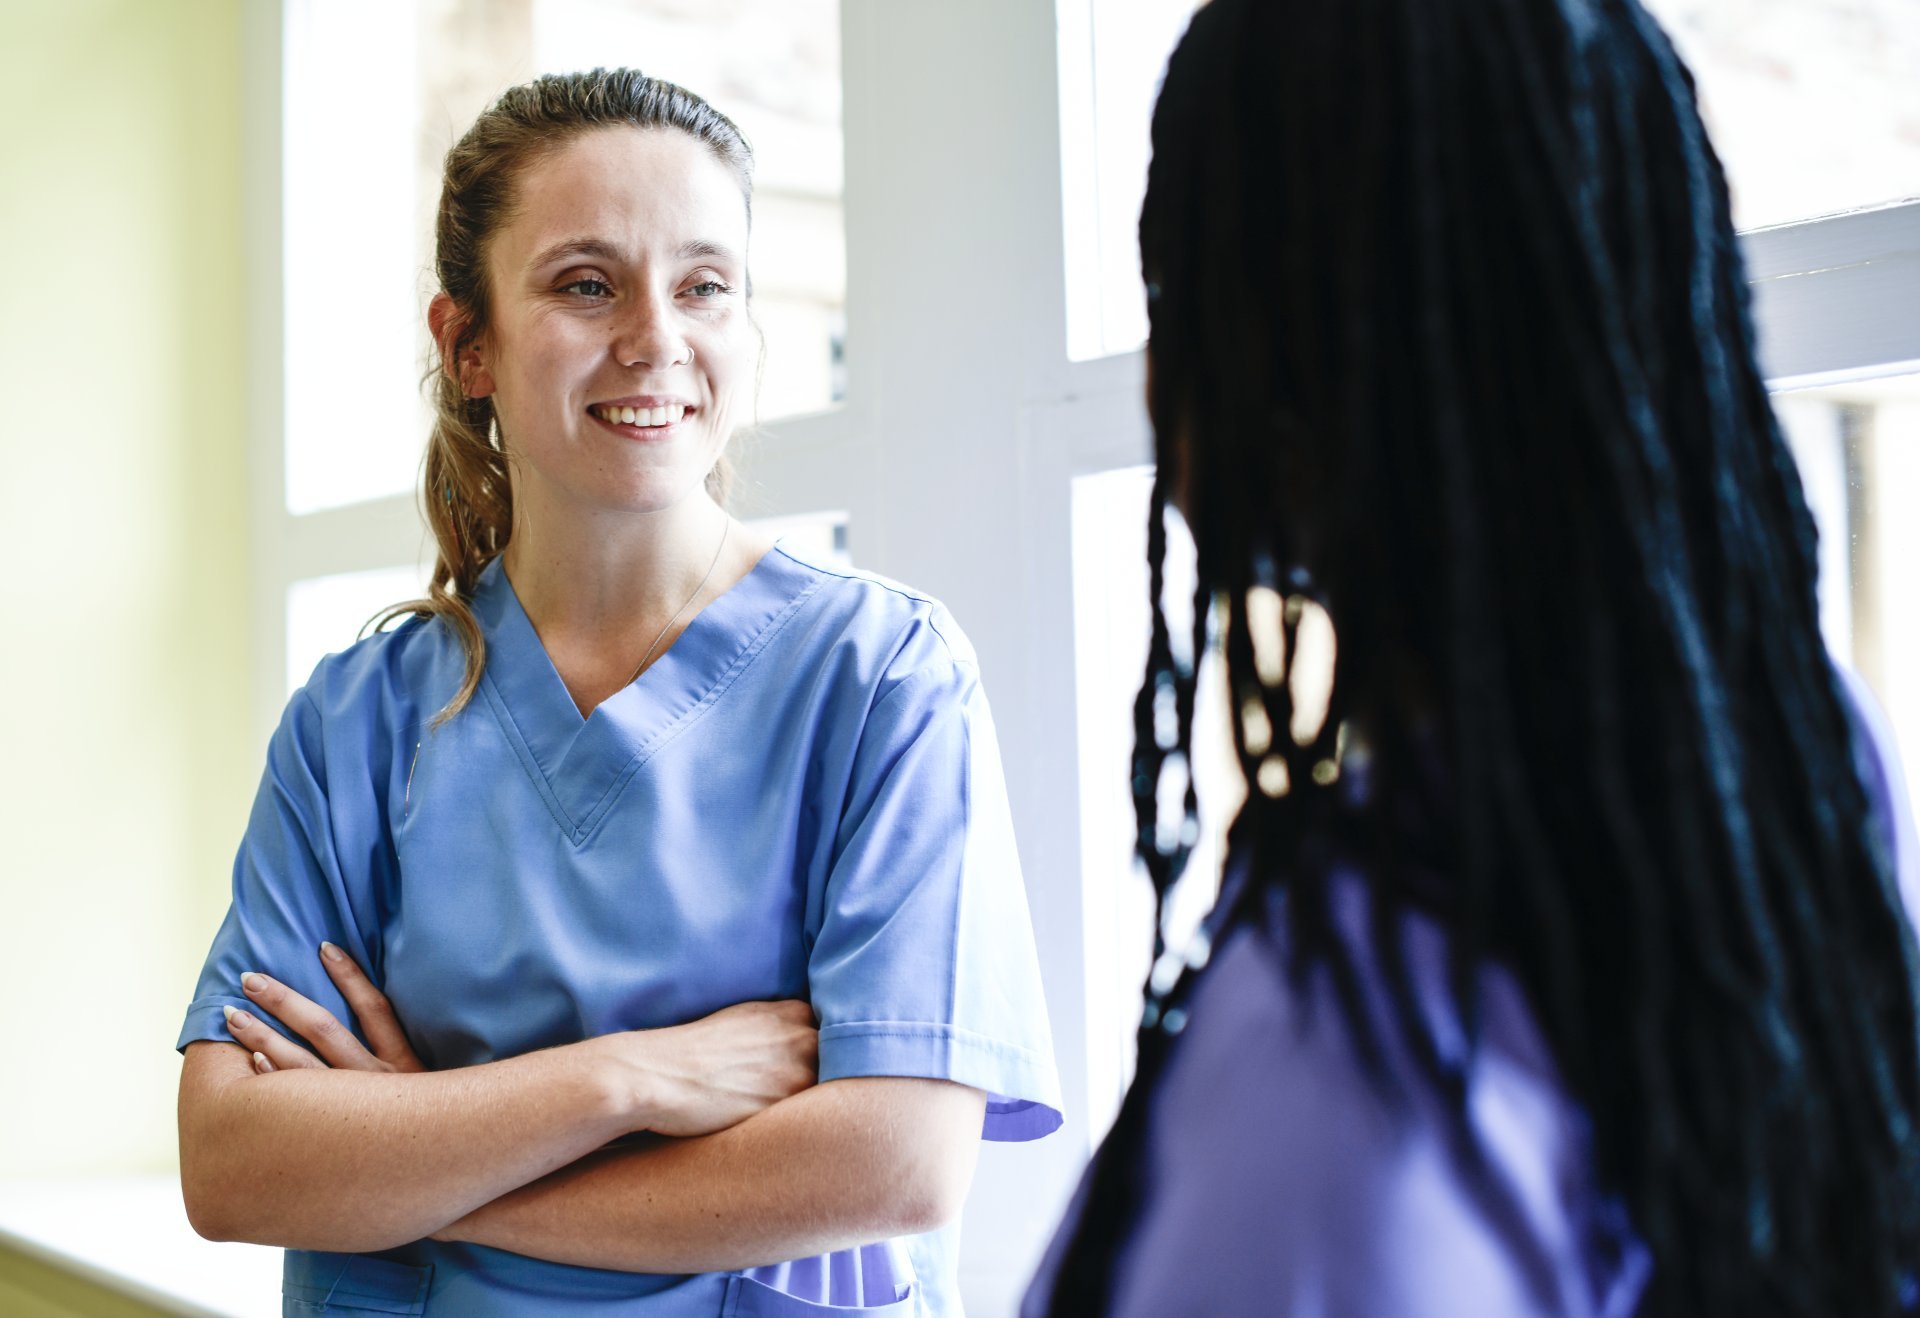 Two female nurses engage in conversation during a break from work.